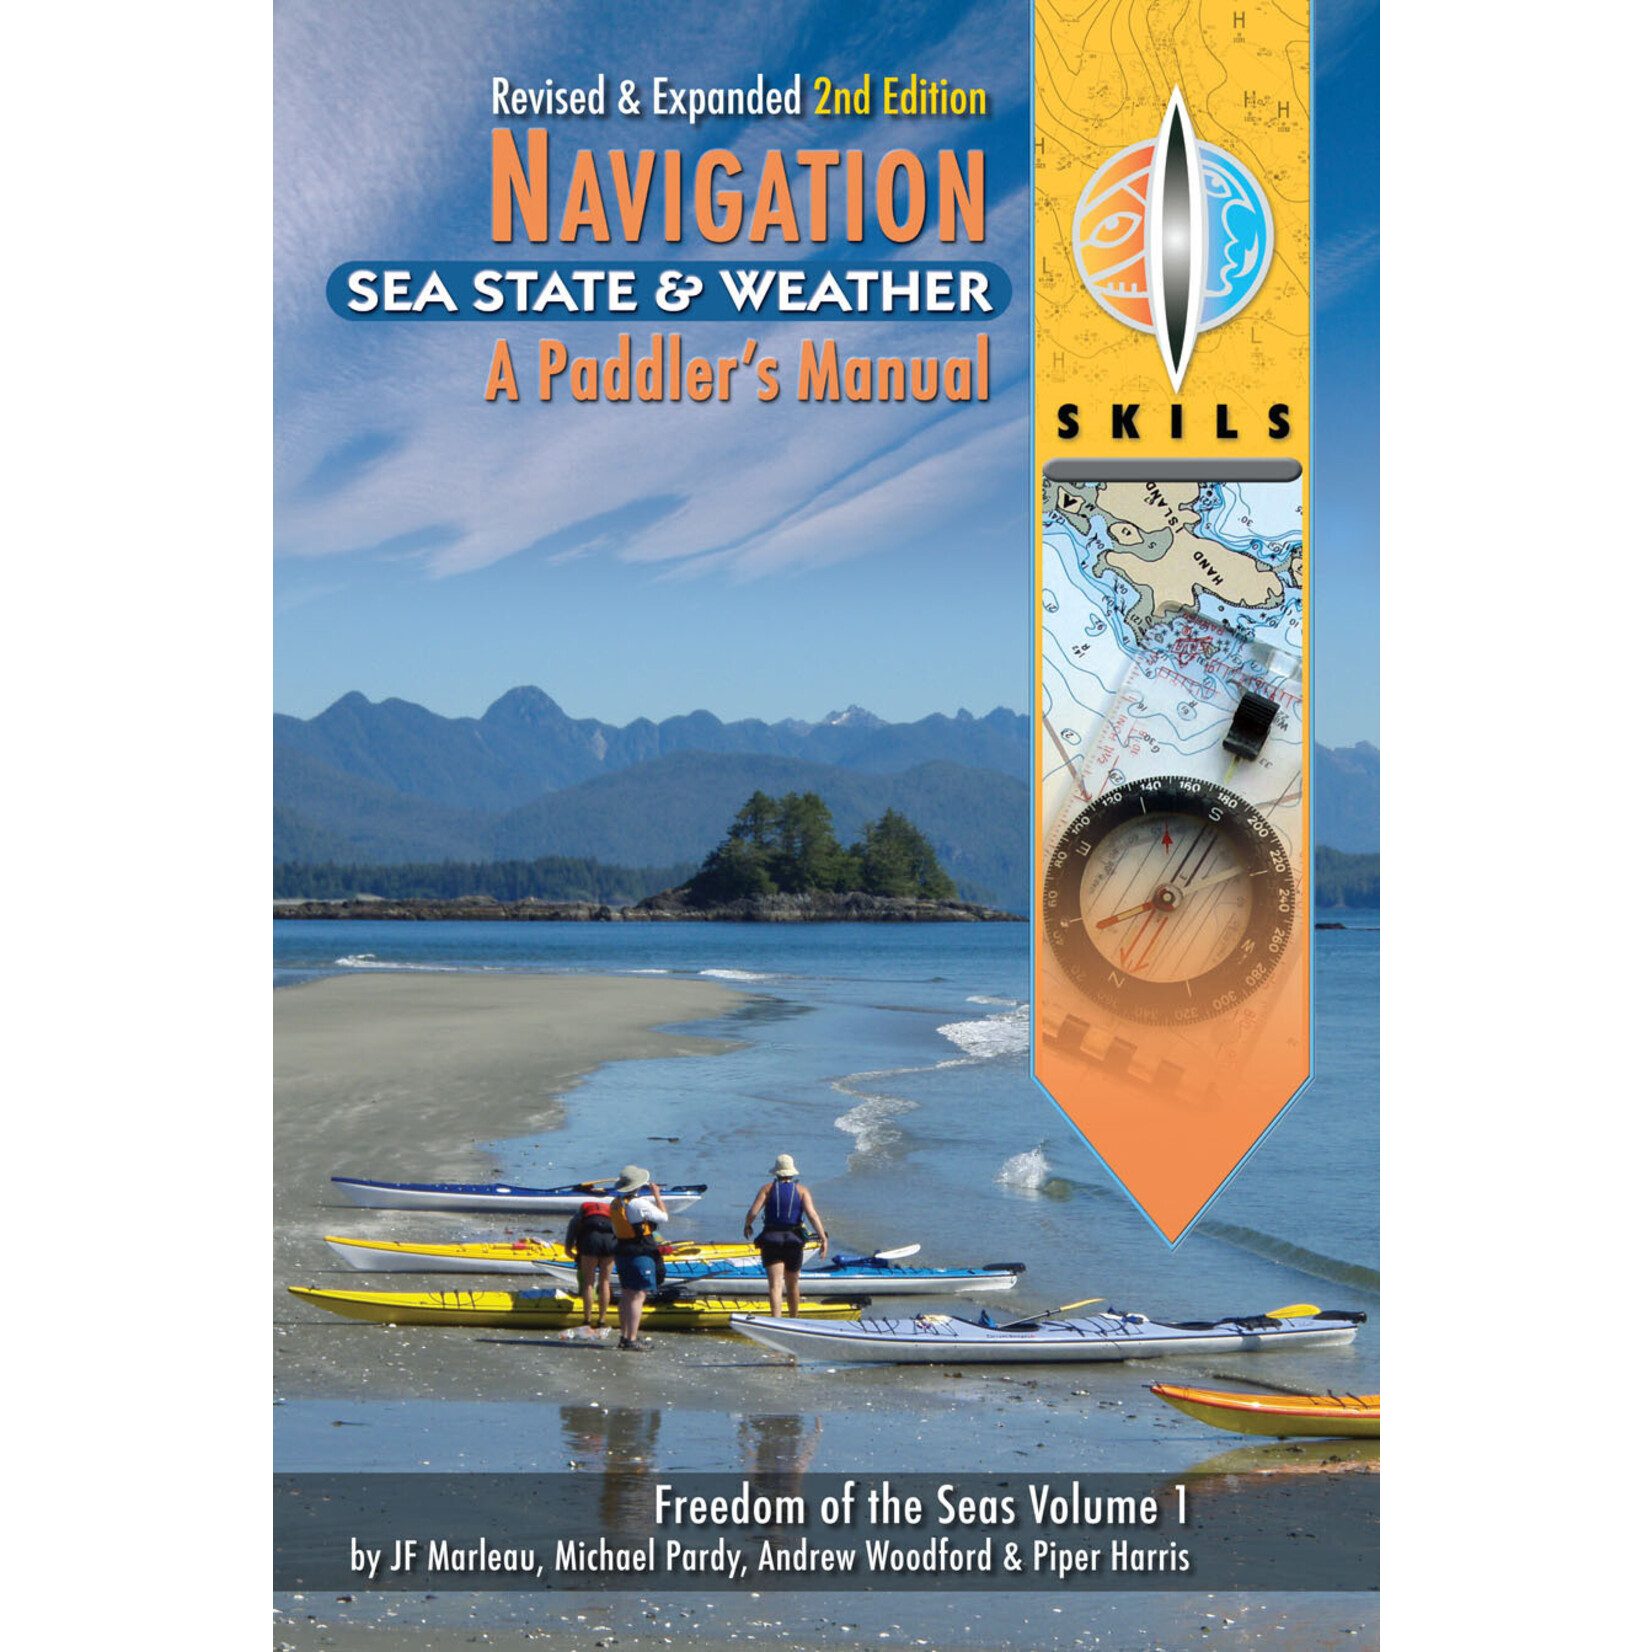 SKILS - Navigation, Sea State & Weather - A Paddler's Manual: Freedom of the Seas Volume 1